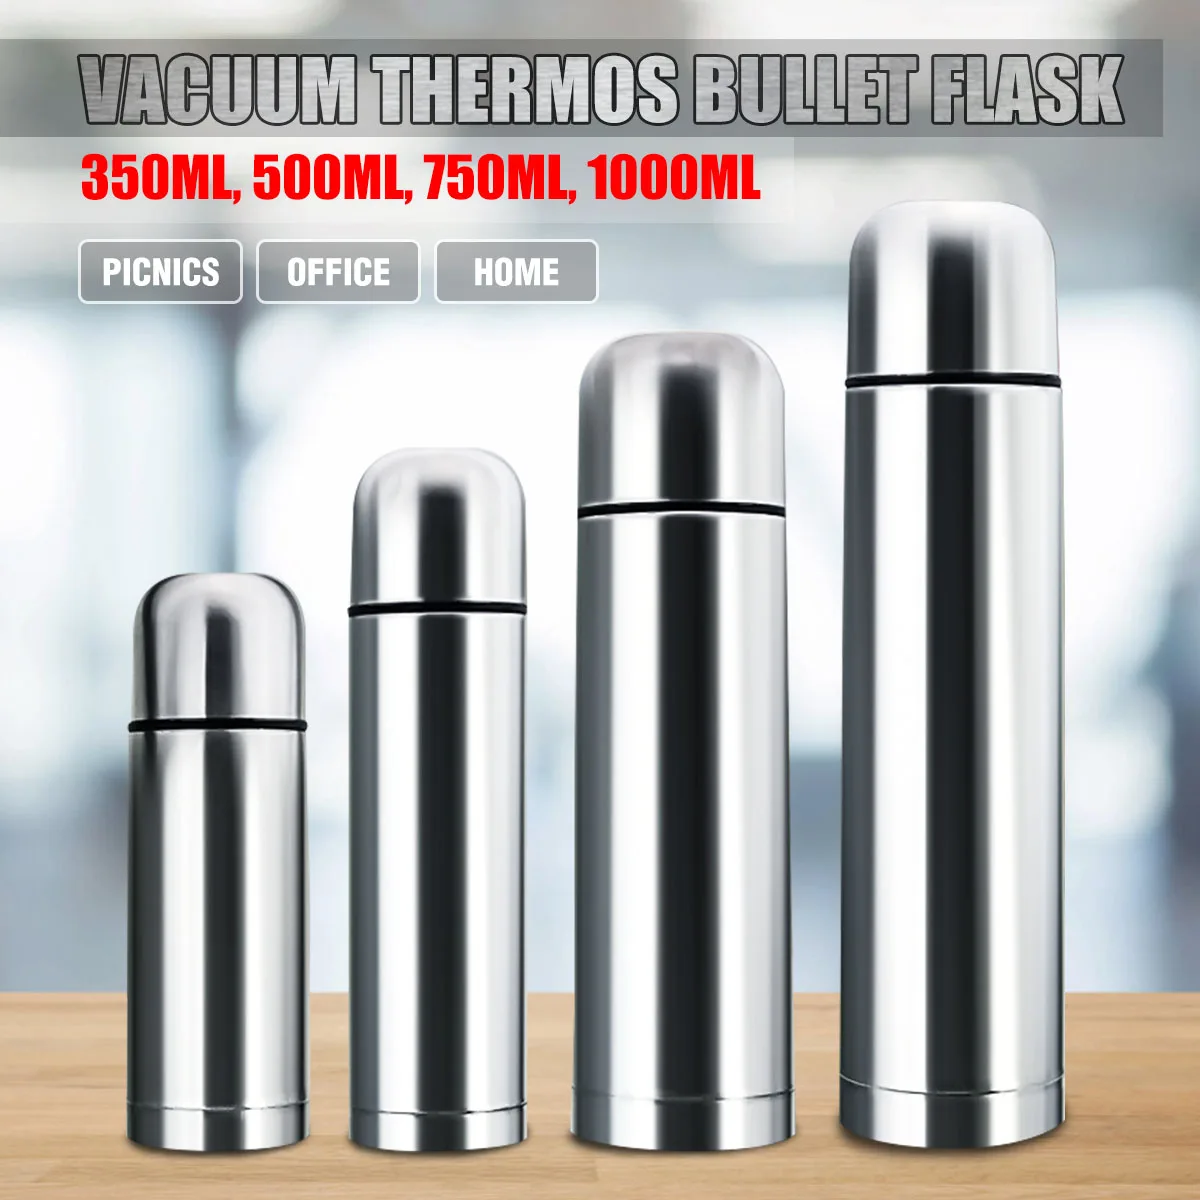 Stainless Steel Vacuum Thermos Bullet Flask HOT&COLD 